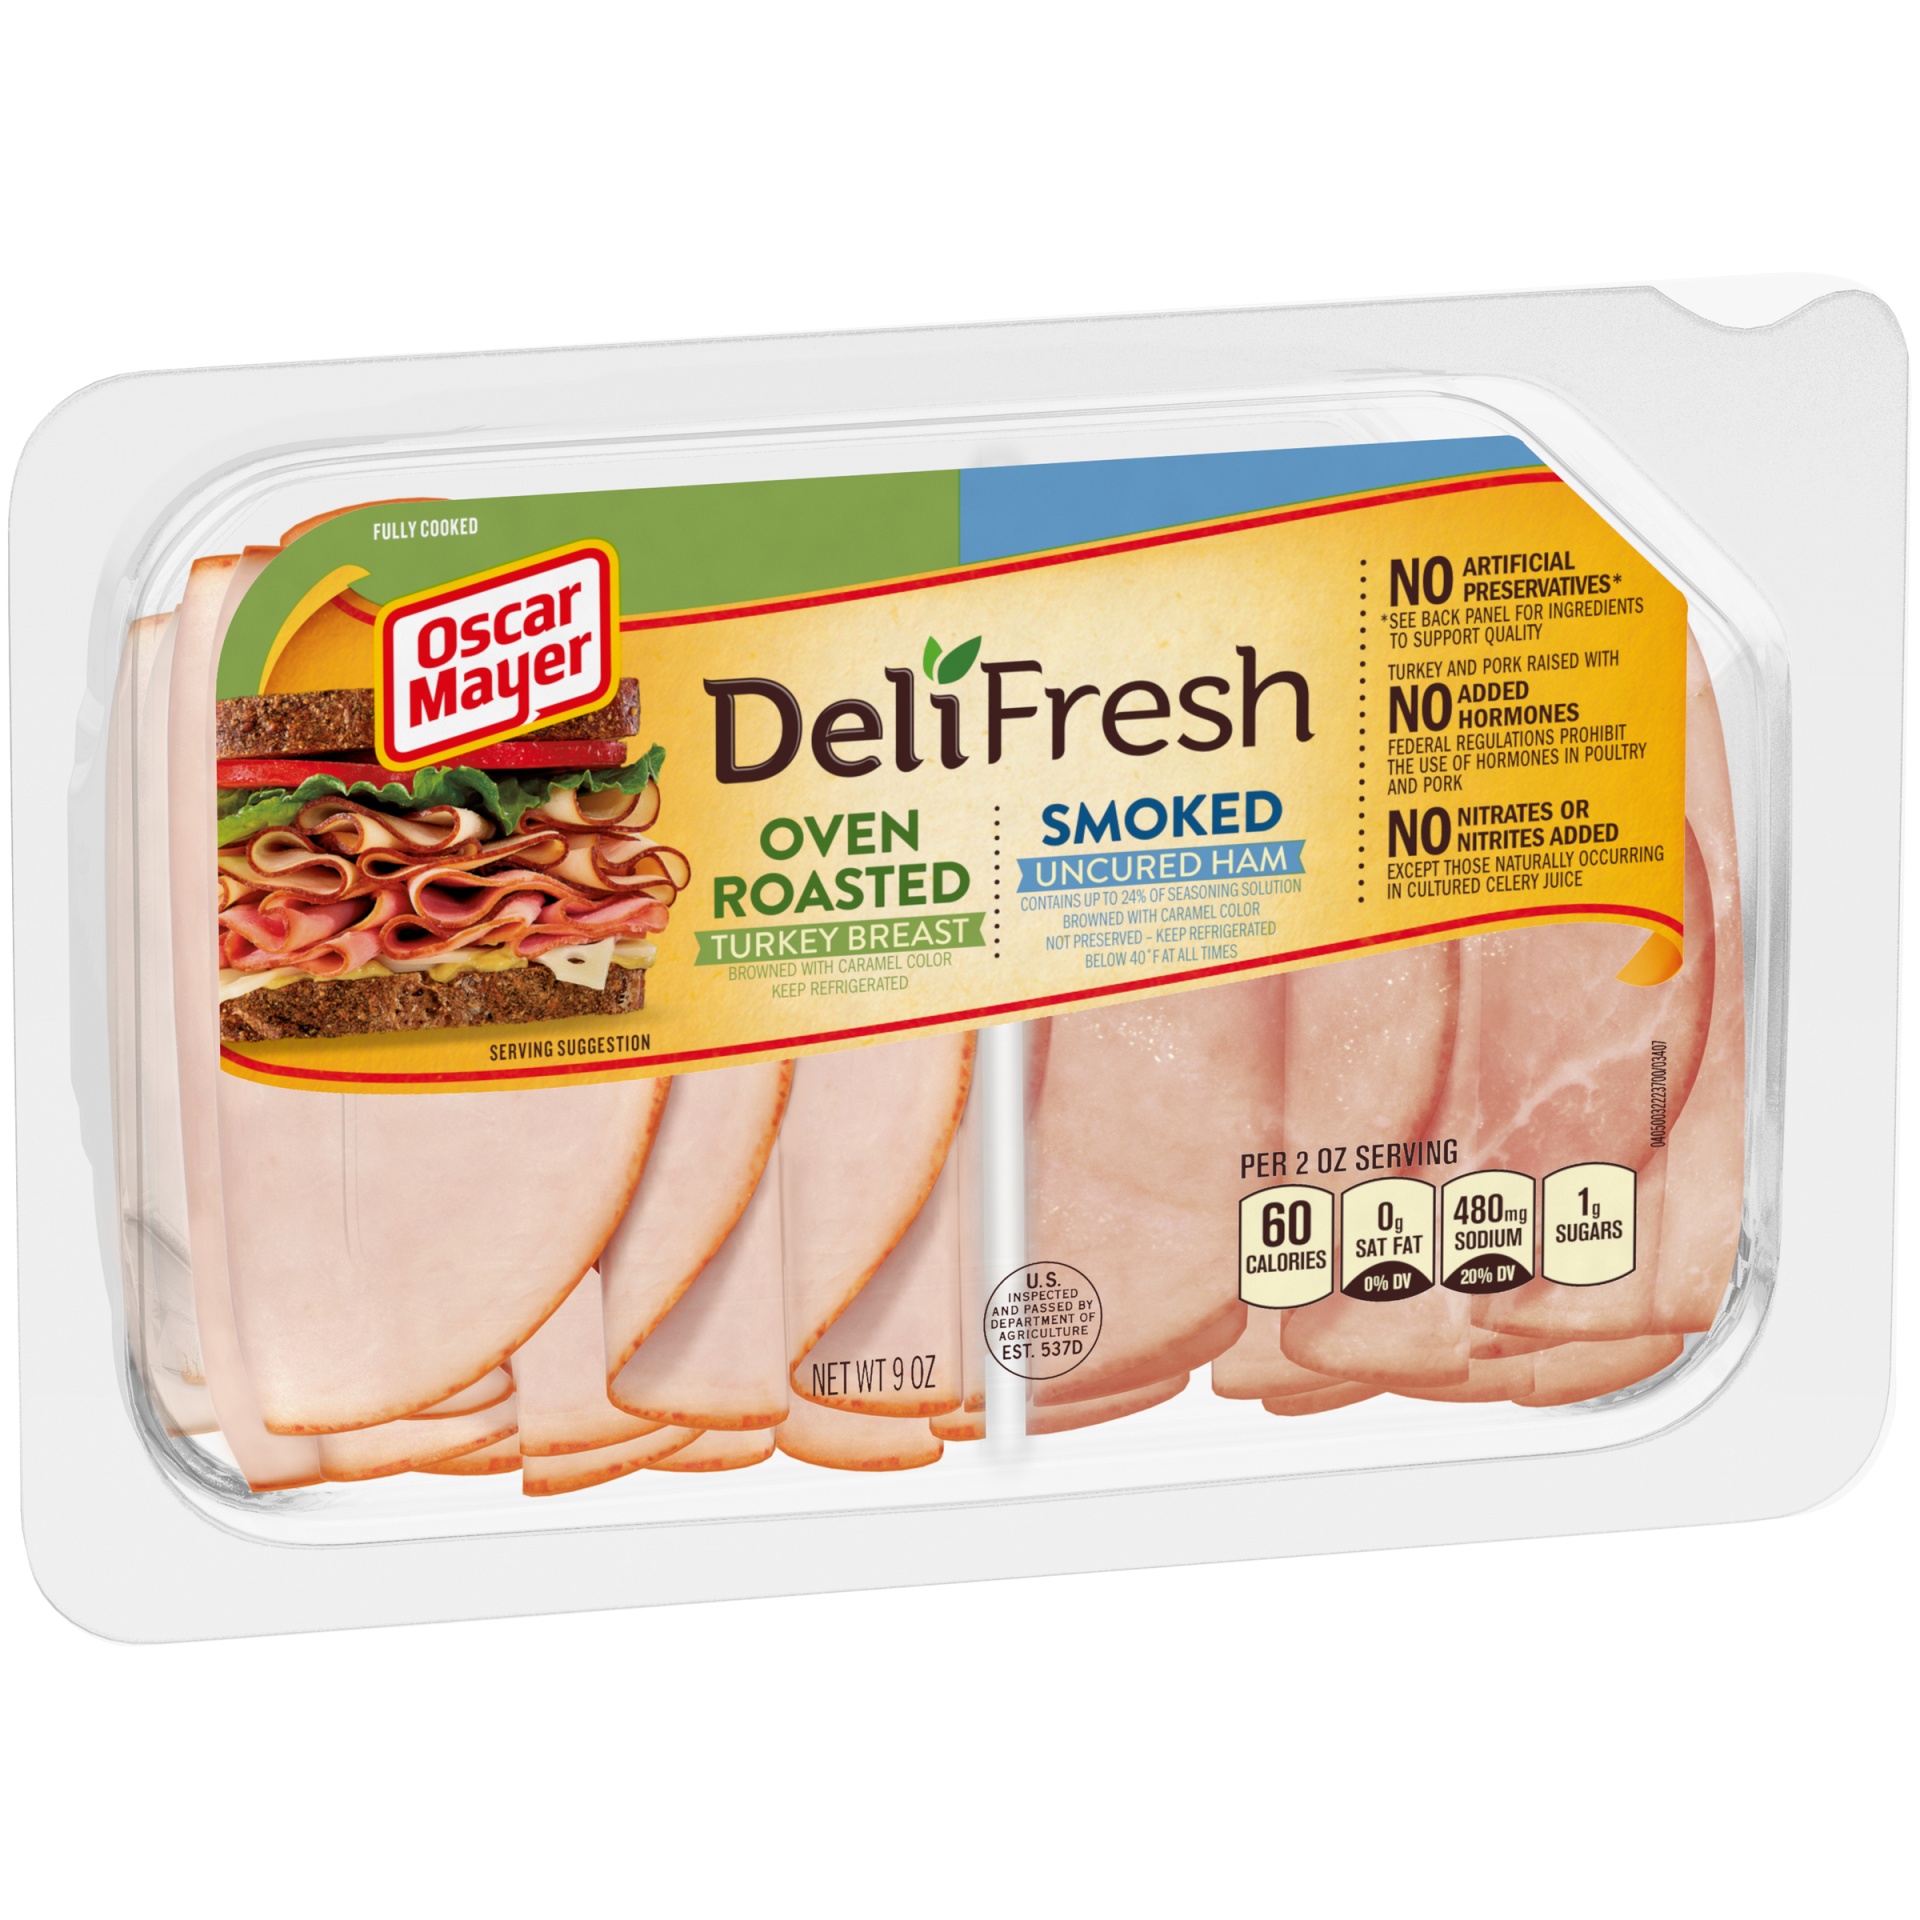 slide 2 of 6, Oscar Mayer Deli Fresh Oven Roasted Turkey Breast & Smoked Uncured Ham Sliced Lunch Meat Variety Pack Tray, 9 oz